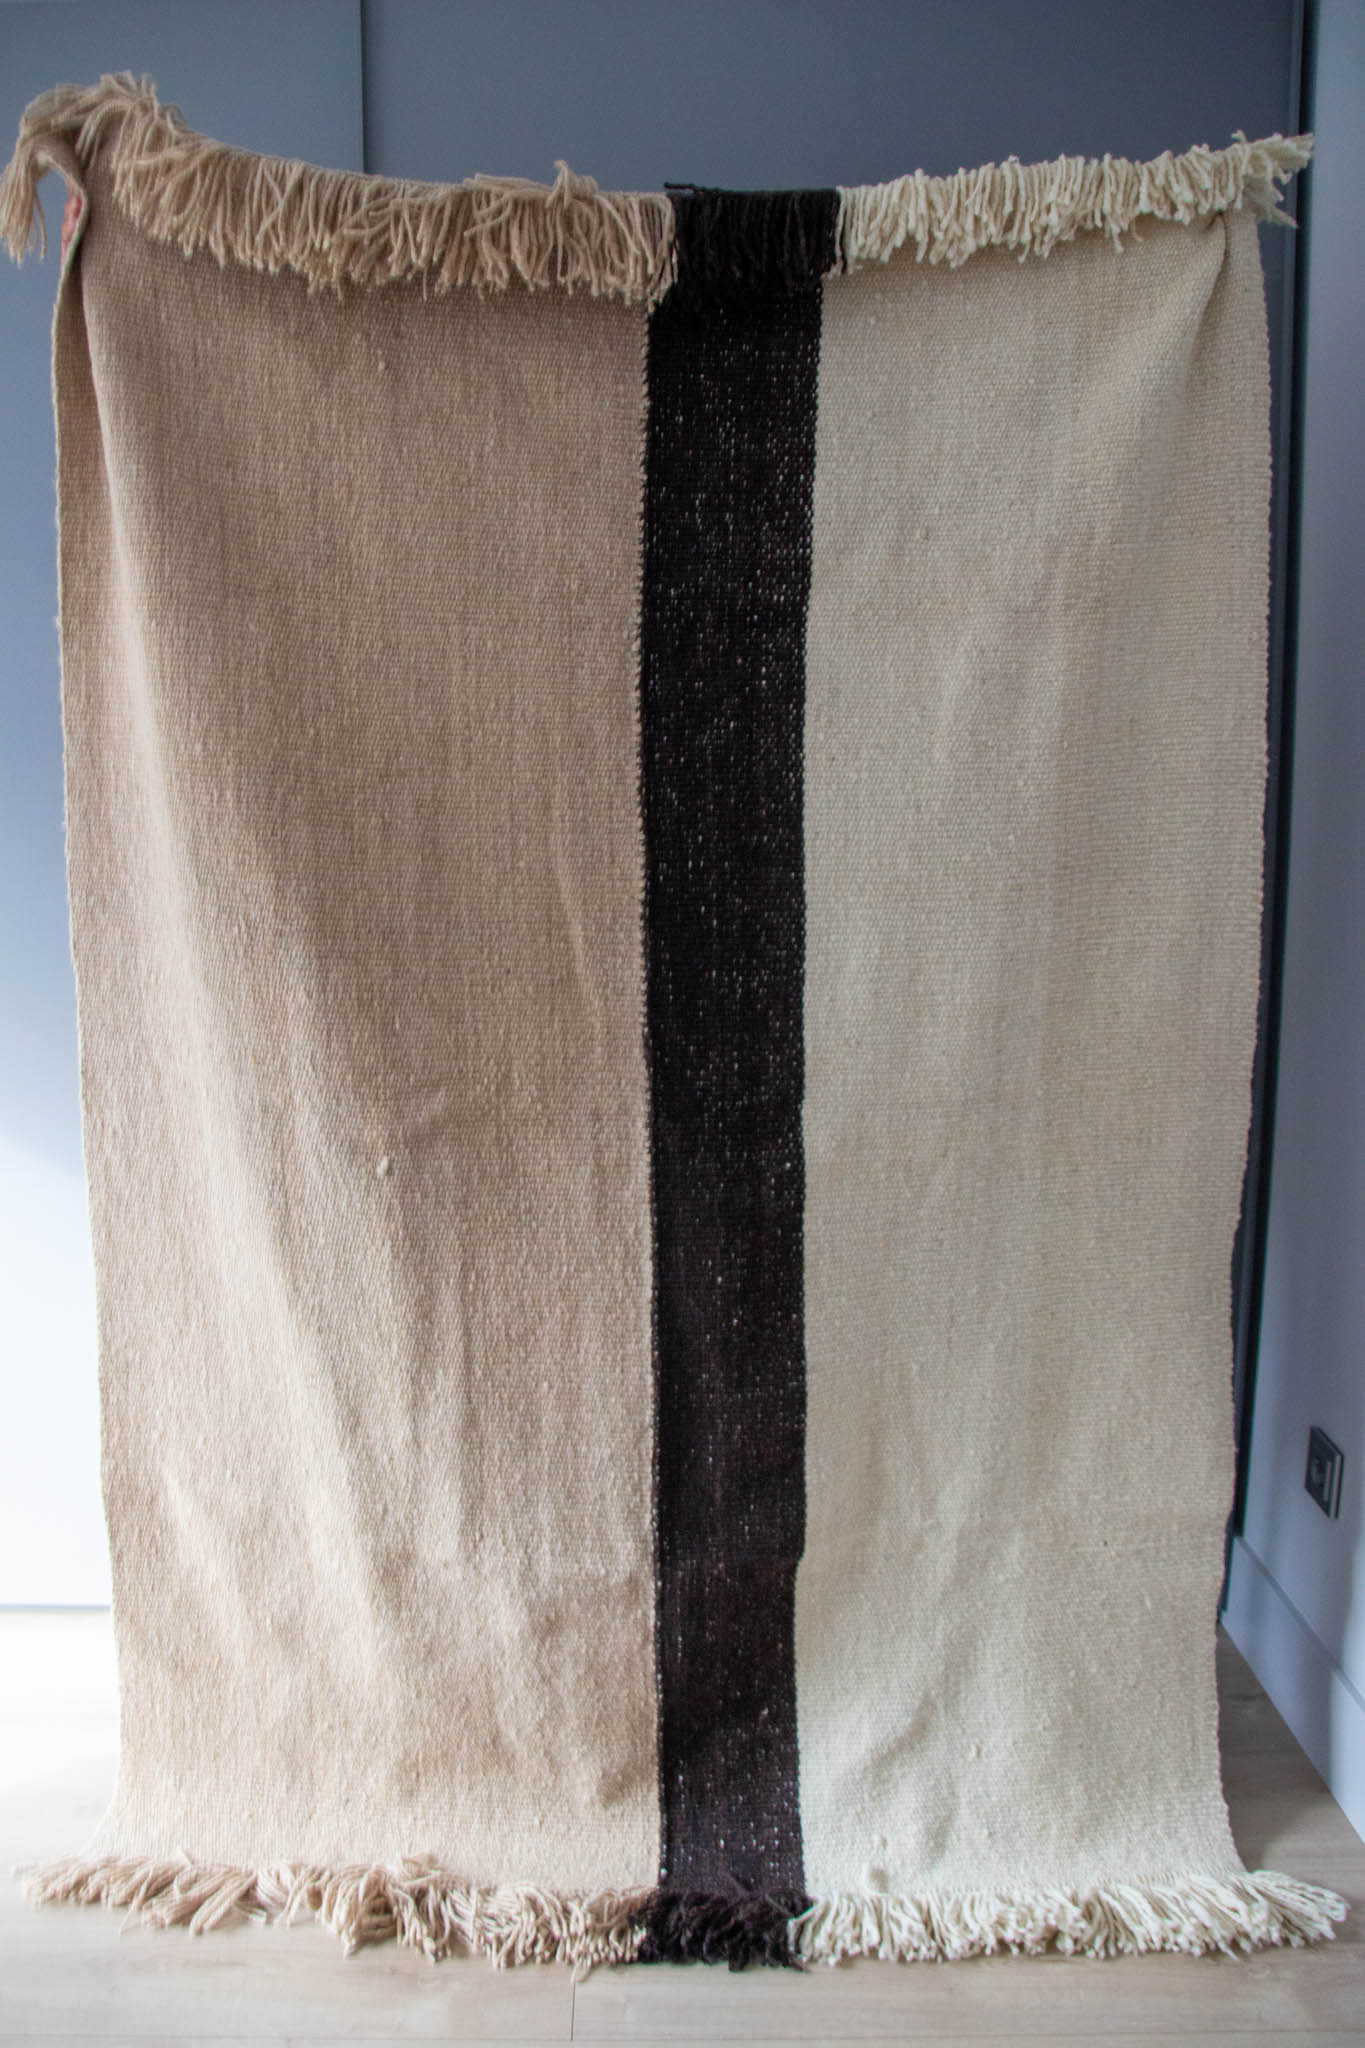 Catamarca XL Rug with 100% sheep wool and natural dyes